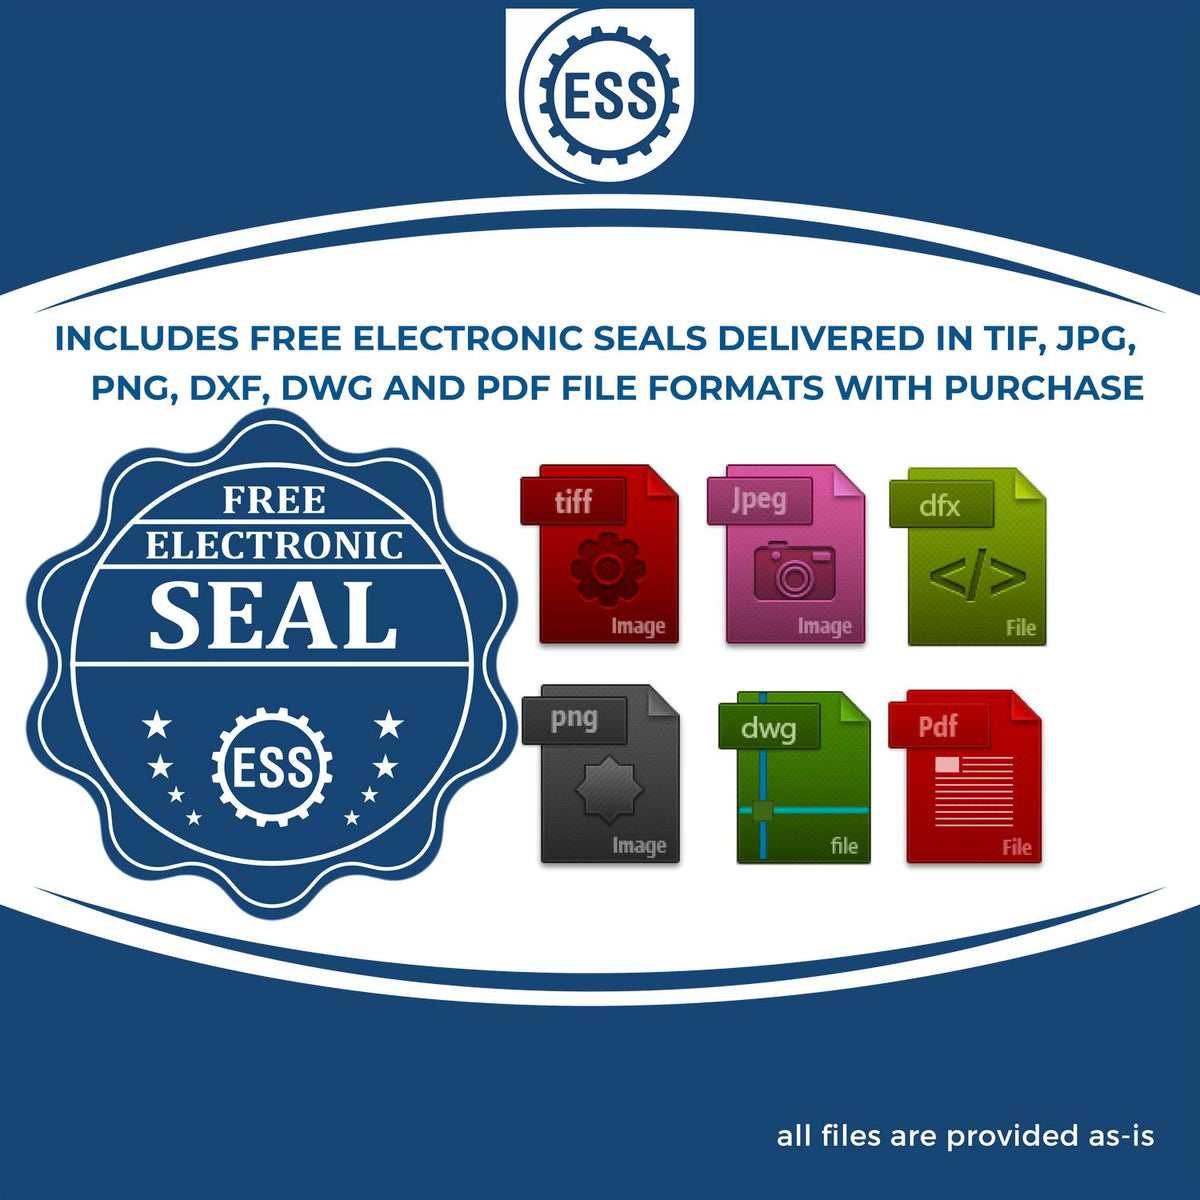 An infographic for the free electronic seal for the Slim Pre-Inked State Seal Notary Stamp for Wisconsin illustrating the different file type icons such as DXF, DWG, TIF, JPG and PNG.